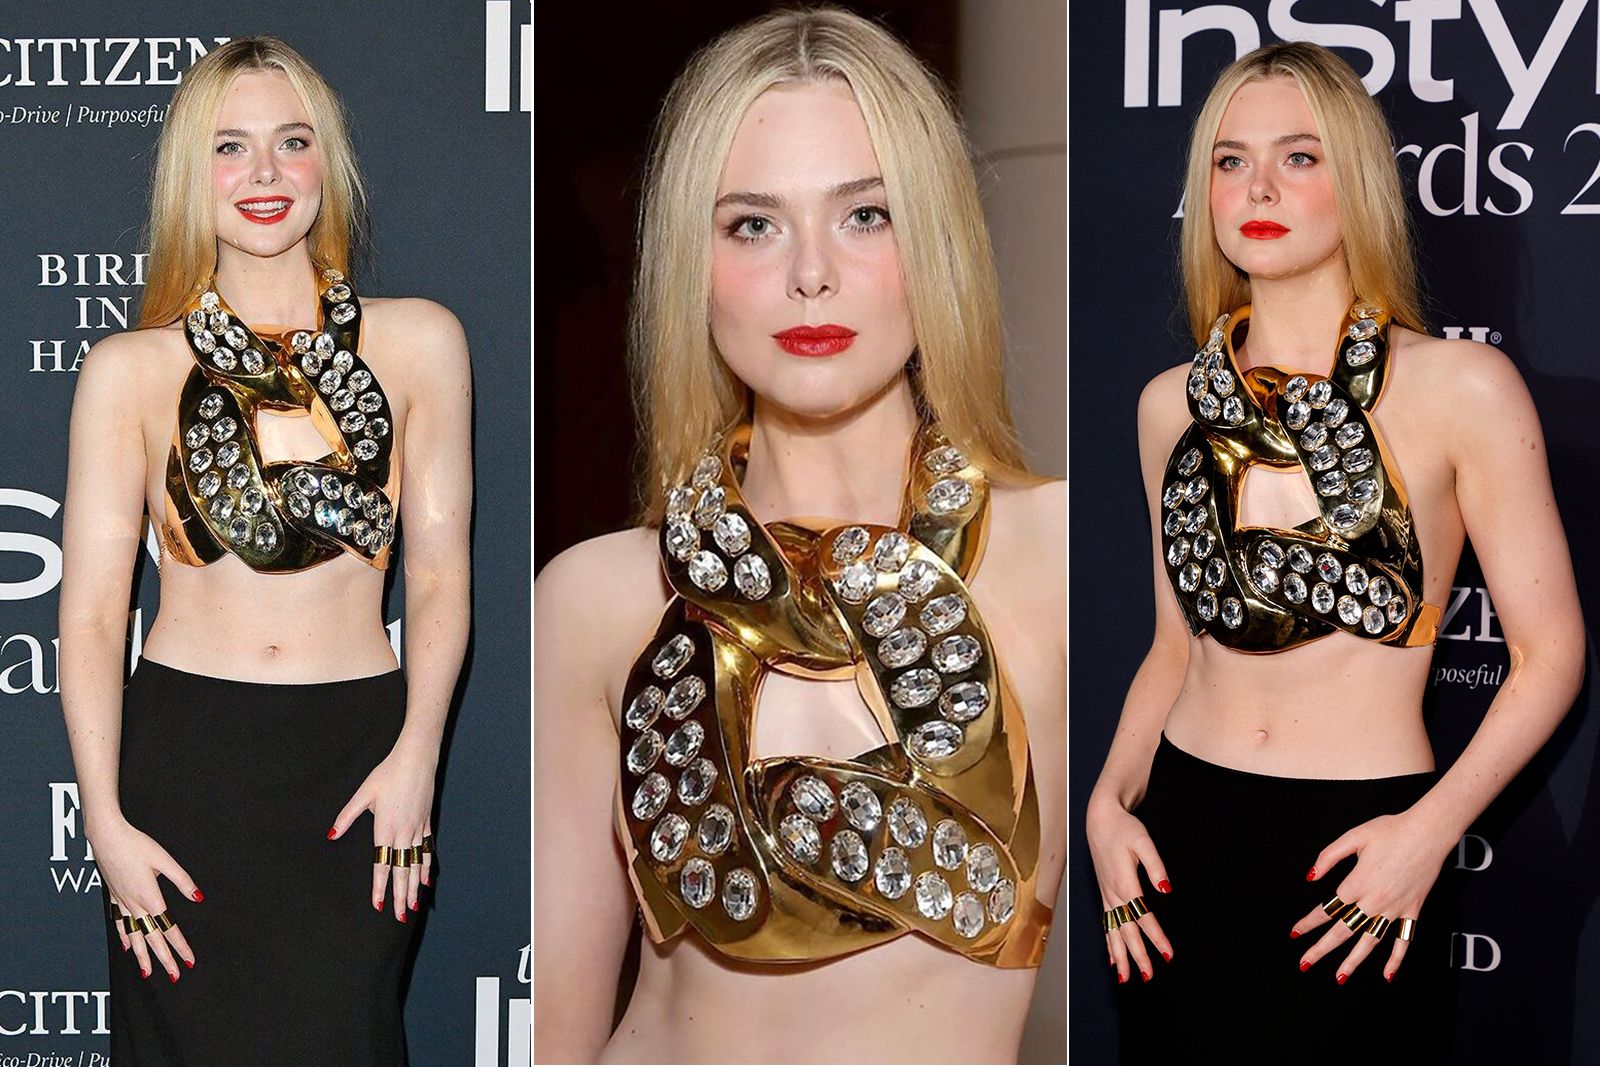 Actress Elle Fanning in a Balmain gold chain-inspired top at the InStyle Awards 2021